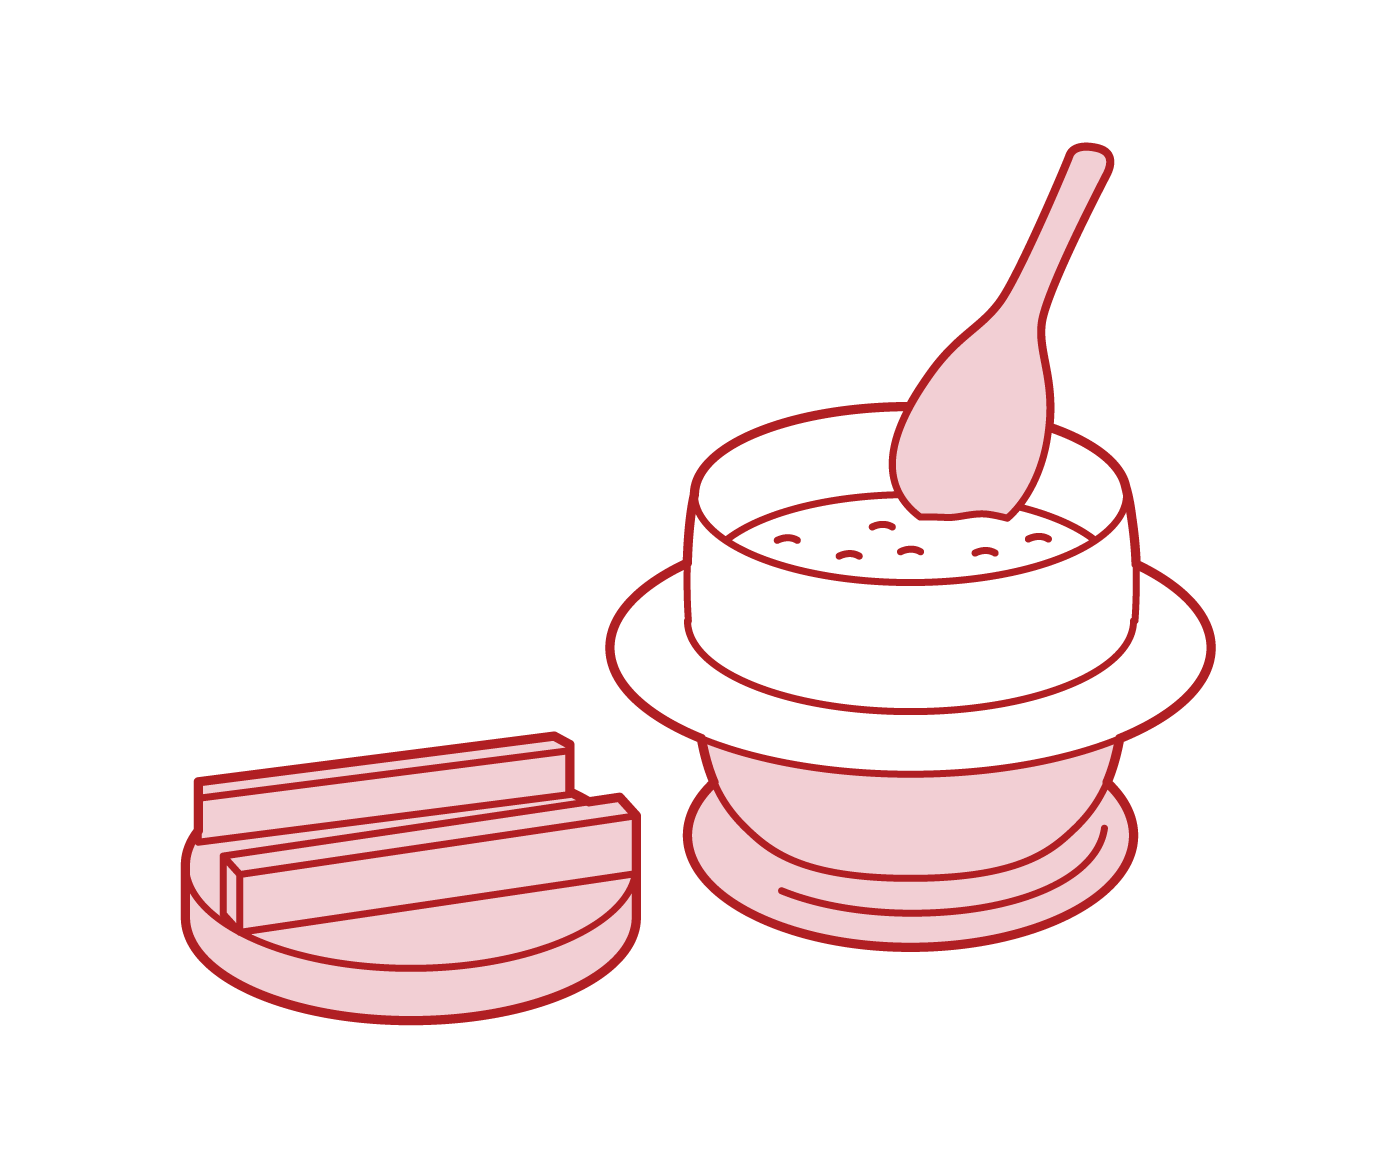 Illustration of rice cooked in a kettle